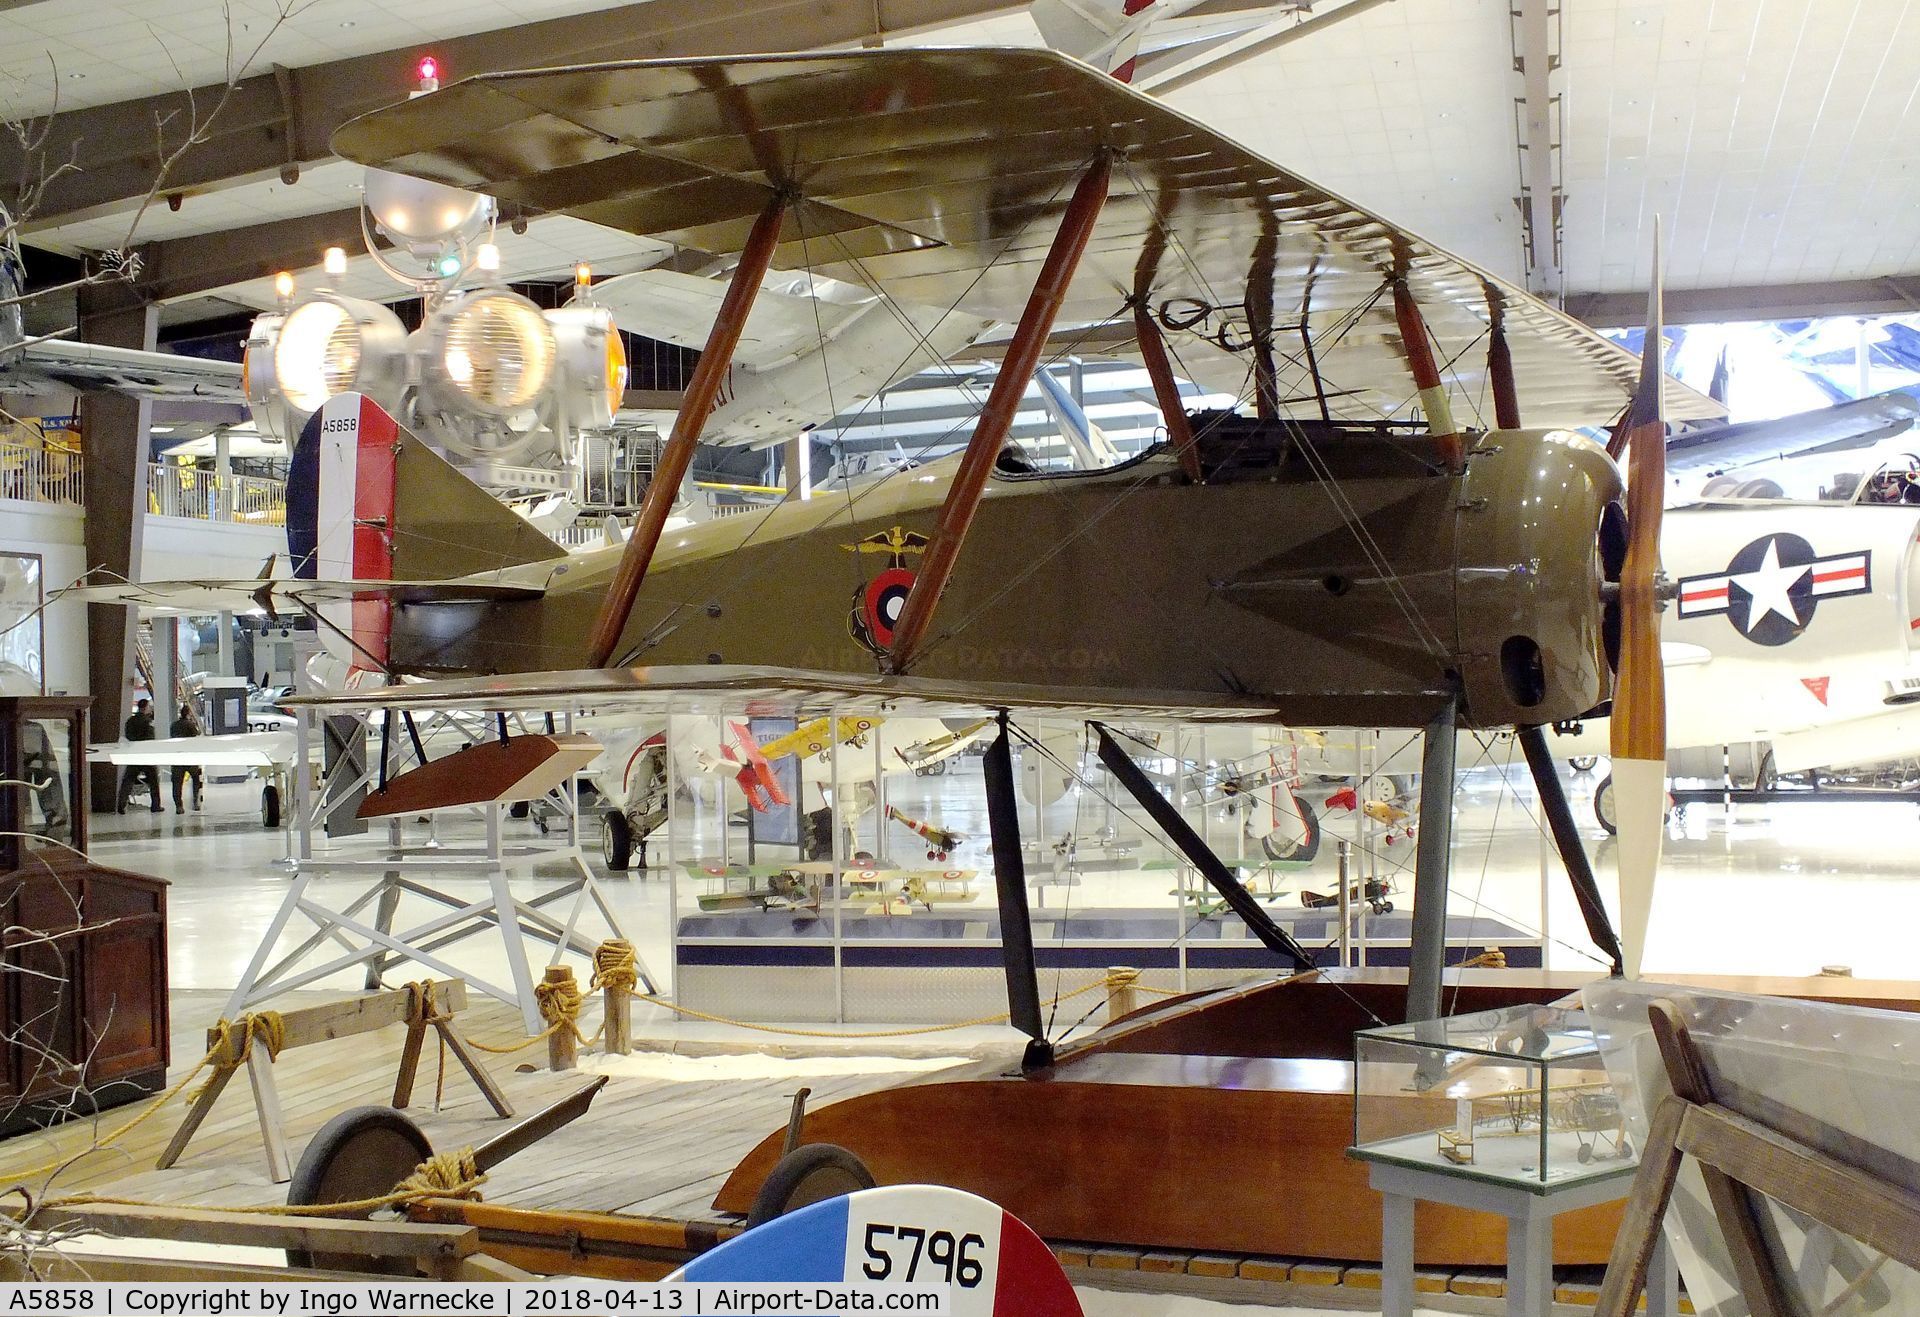 A5858, 1918 Thomas-Morse S-4C-1 Scout C/N 235, Thomas-Morse S-4C-1 Scout on floats at the NMNA, Pensacola